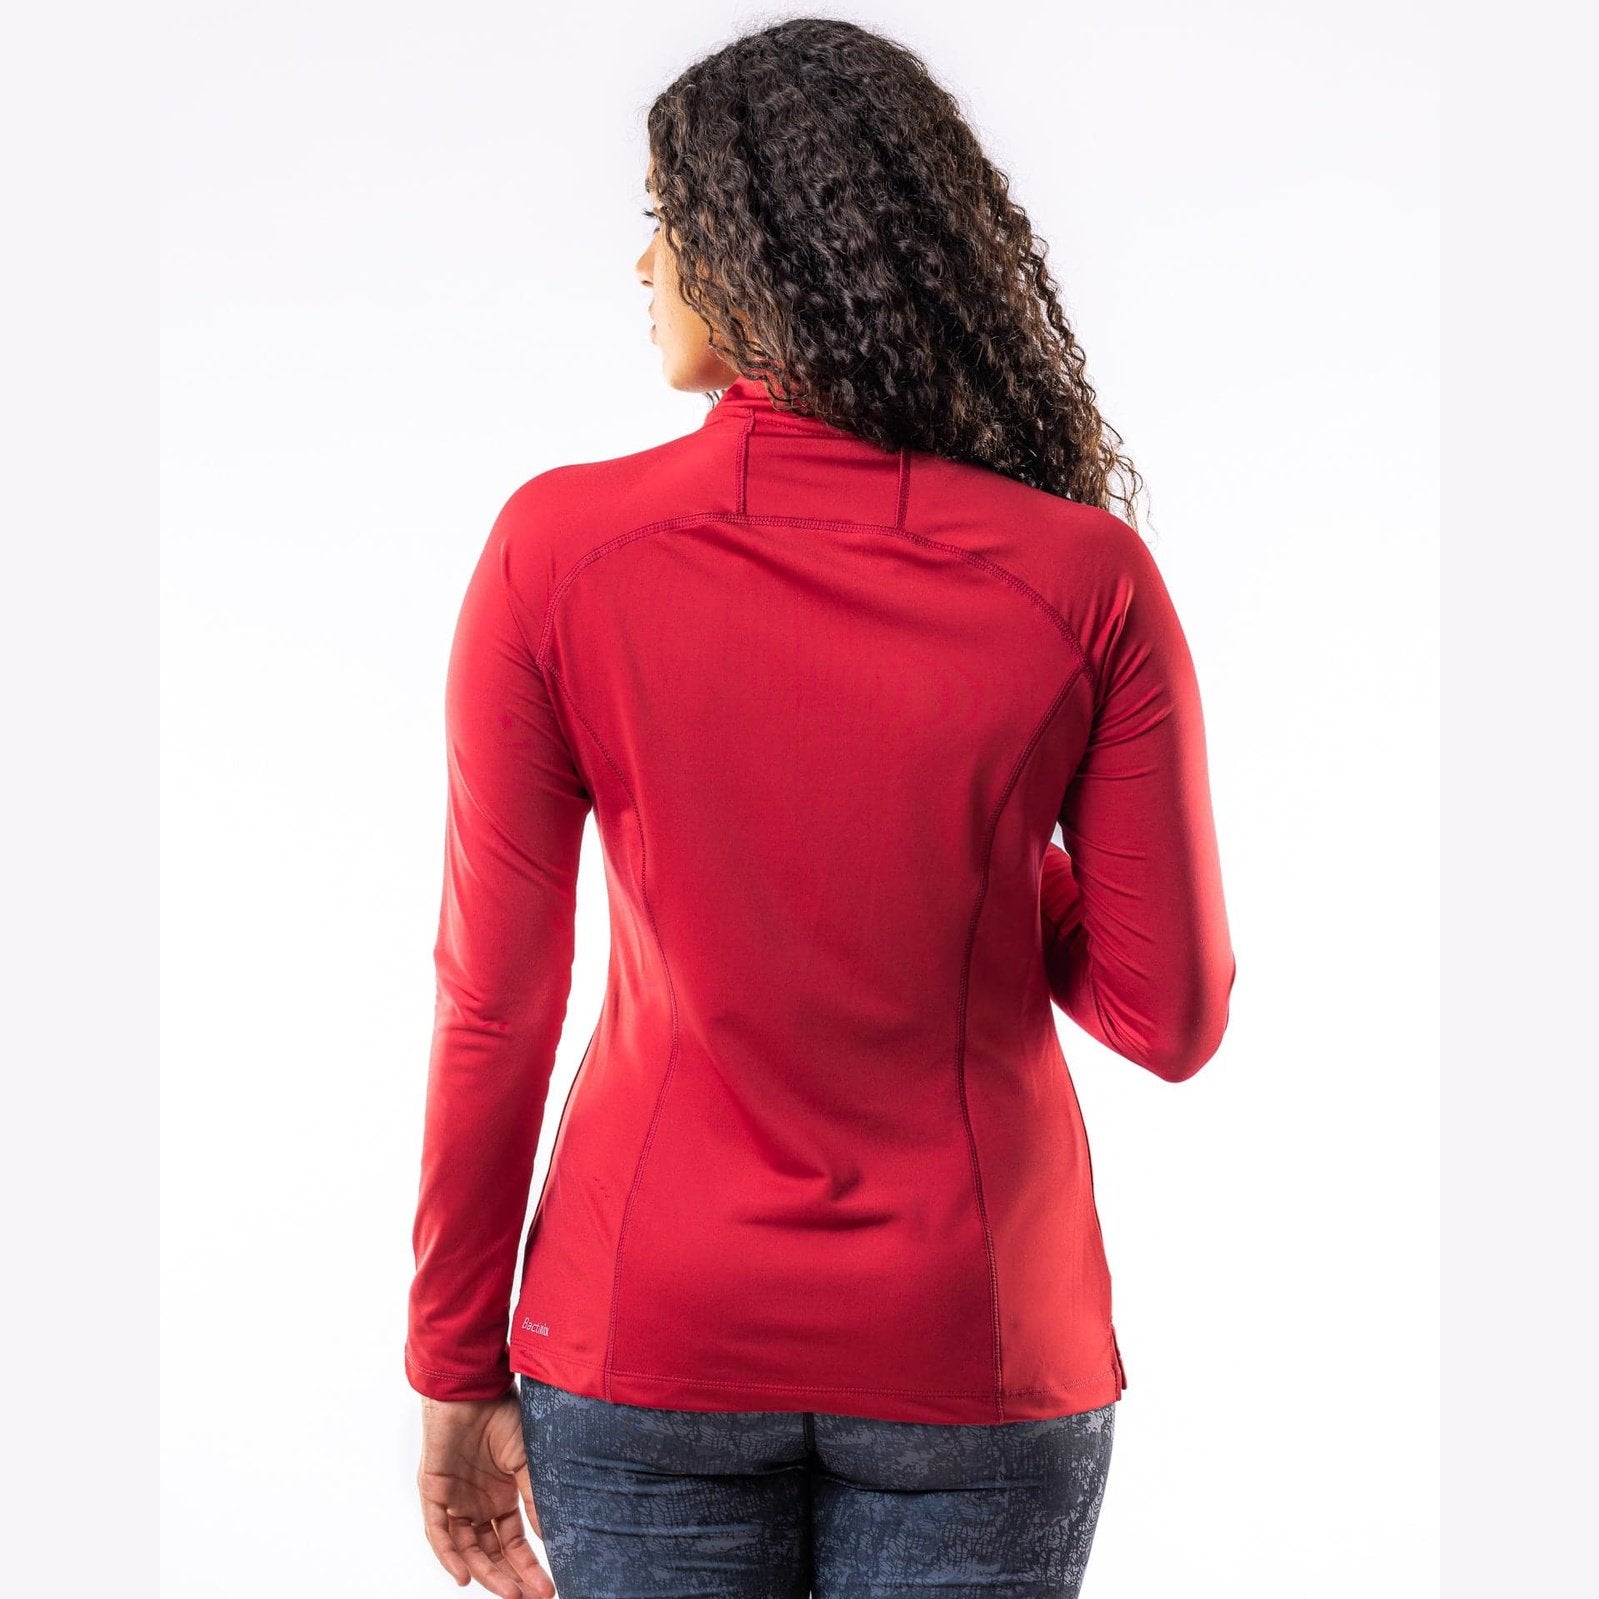 Quick Dry Quarter Zipper in Red - Sporty Pro